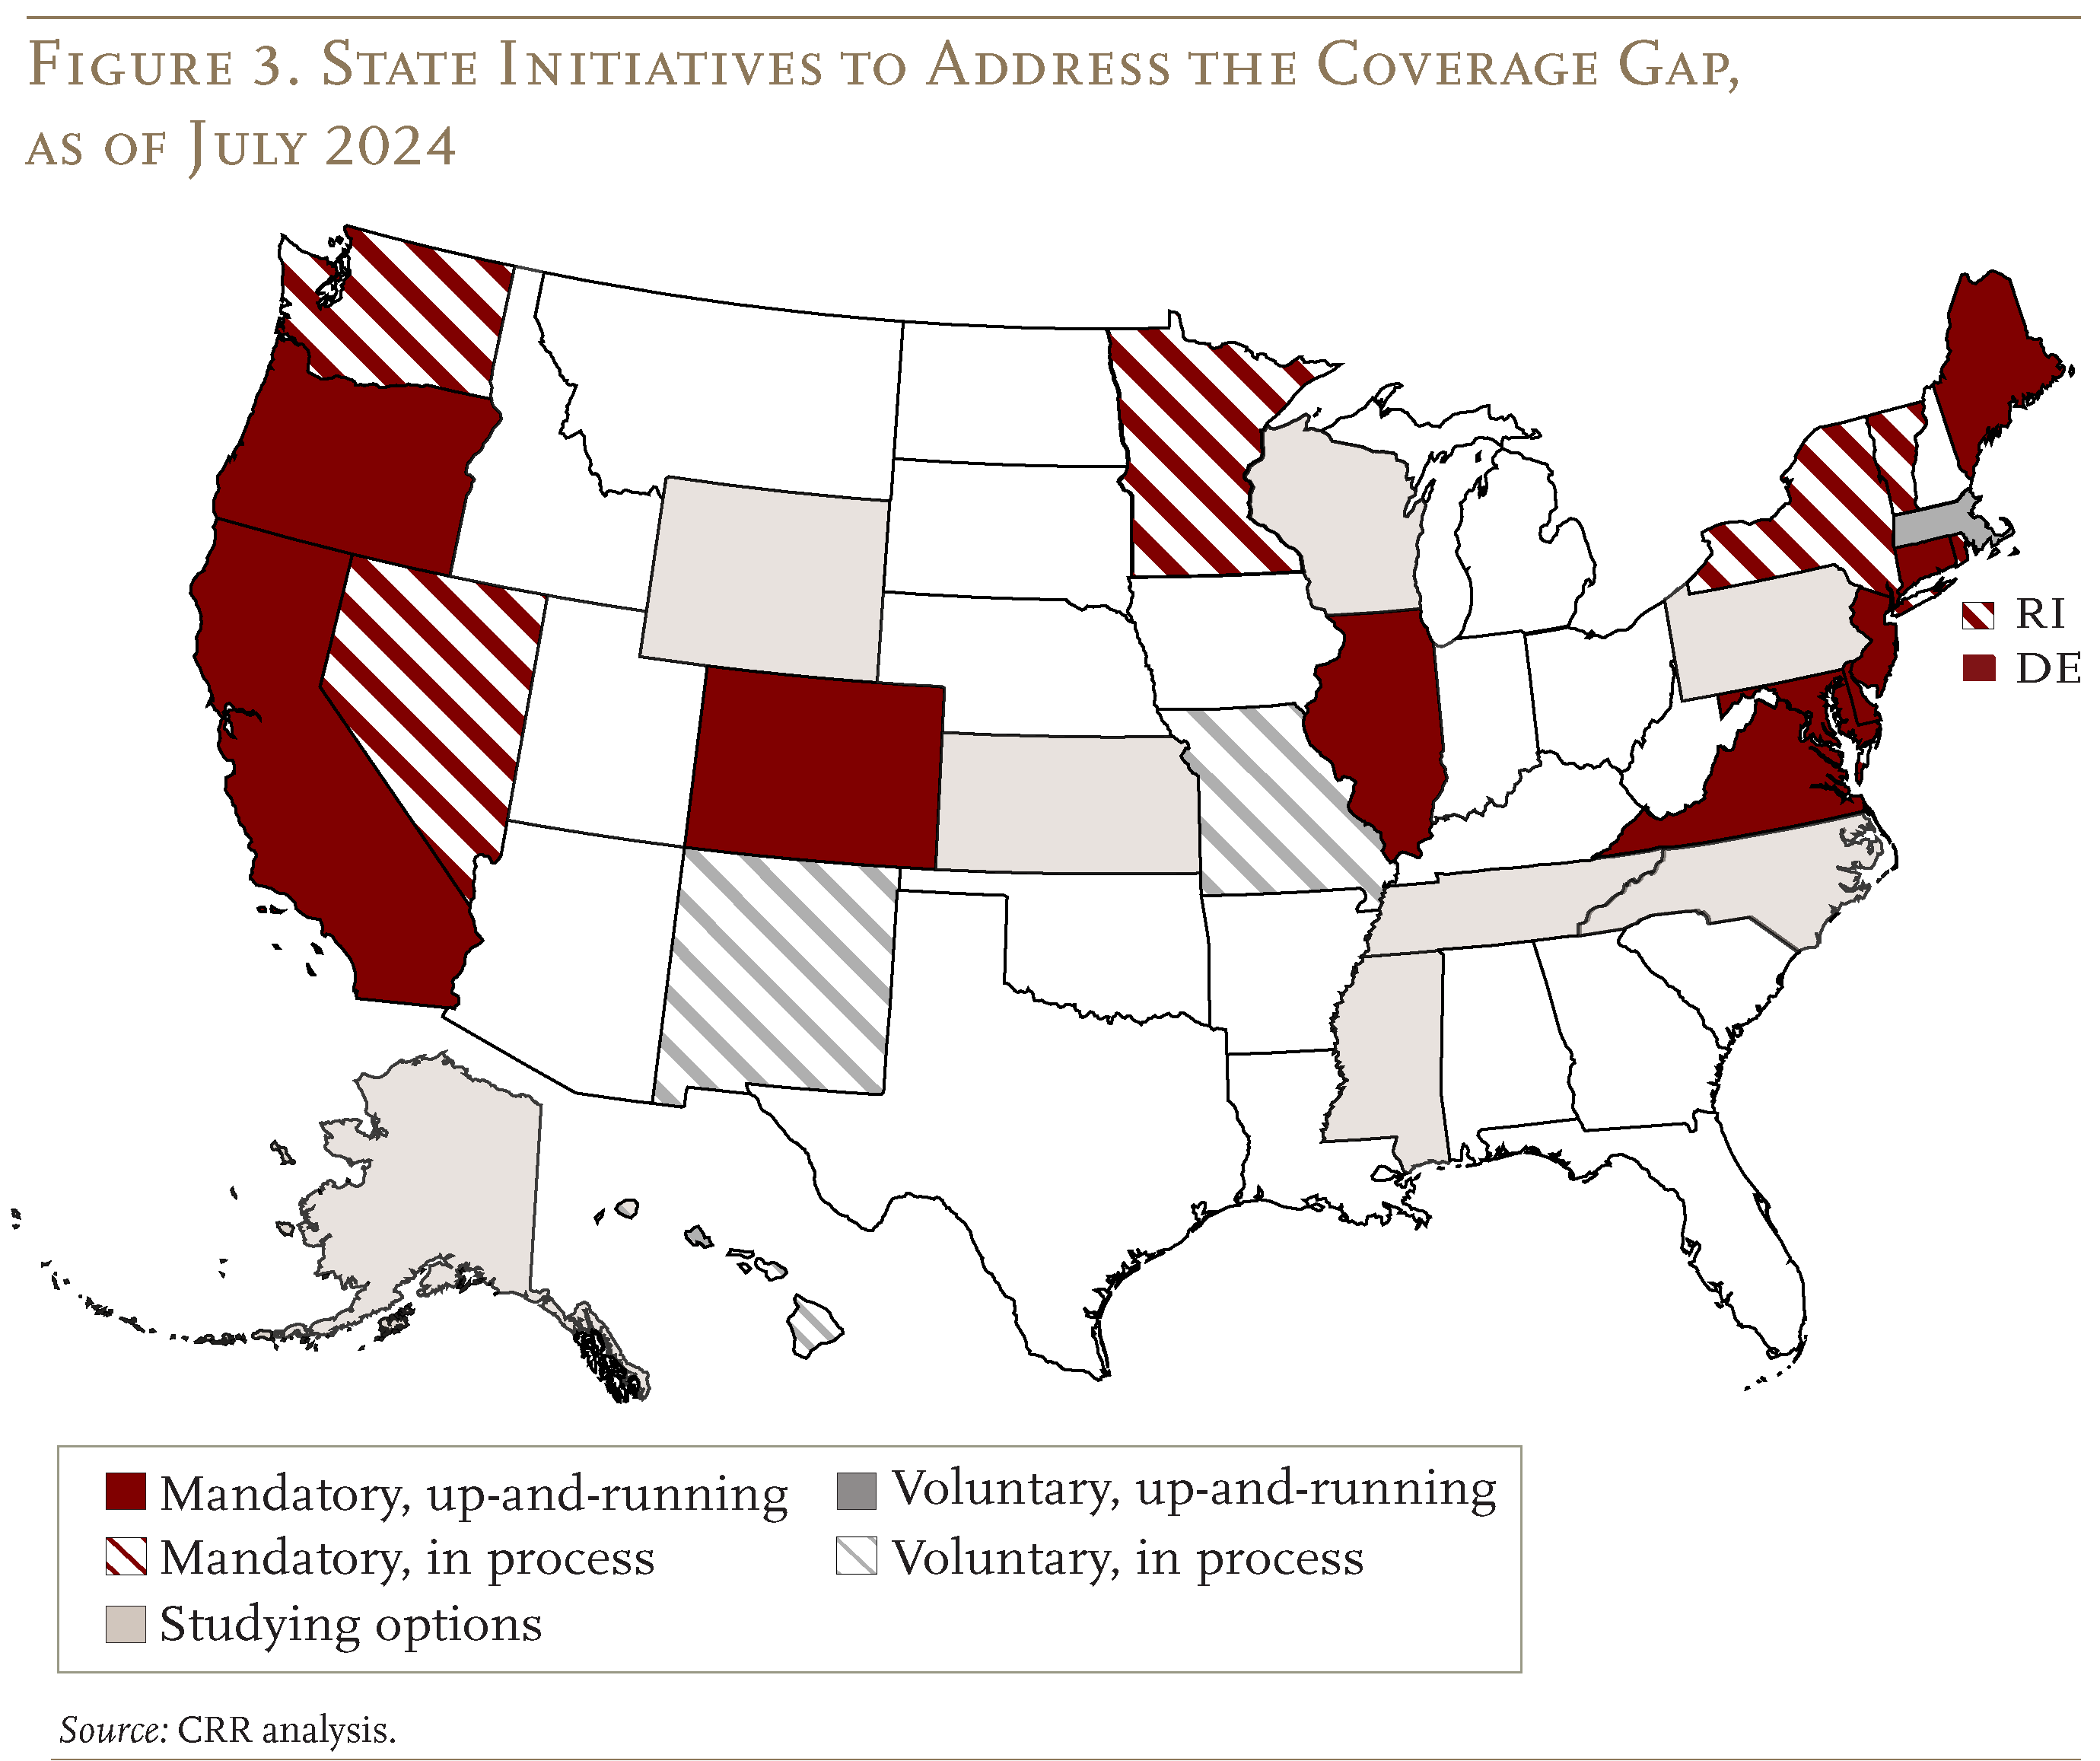 Map showing the state initiatives to address the coverage gap, as of July 2024.